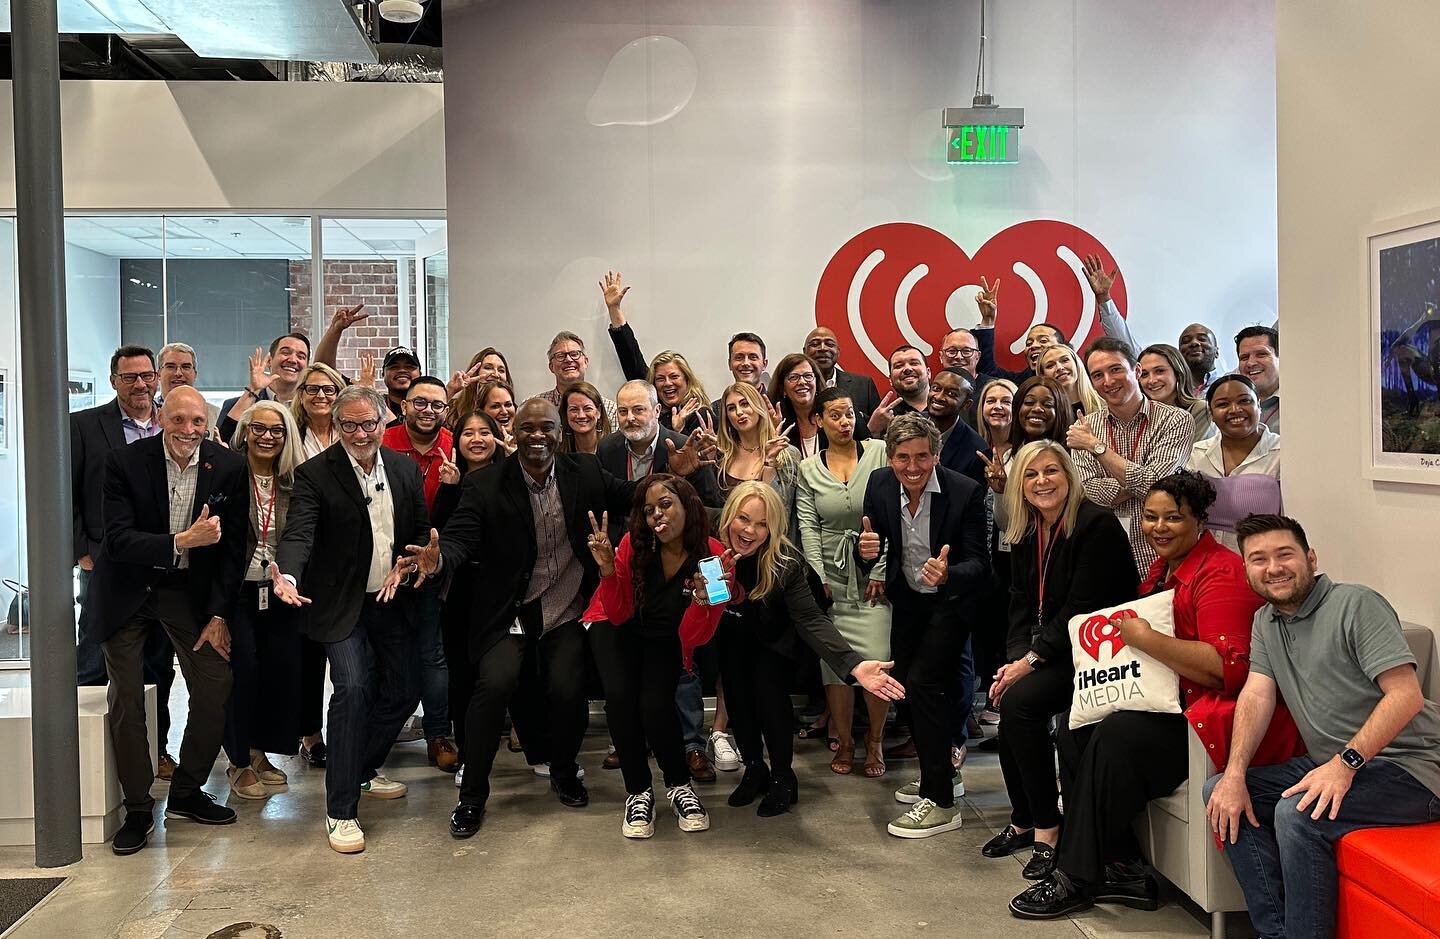 The @iheartmediaofficial Atlanta team with our CEO Bob Pittman &amp; President/COO/CFO Richard Bressler! Can you find me? 😎